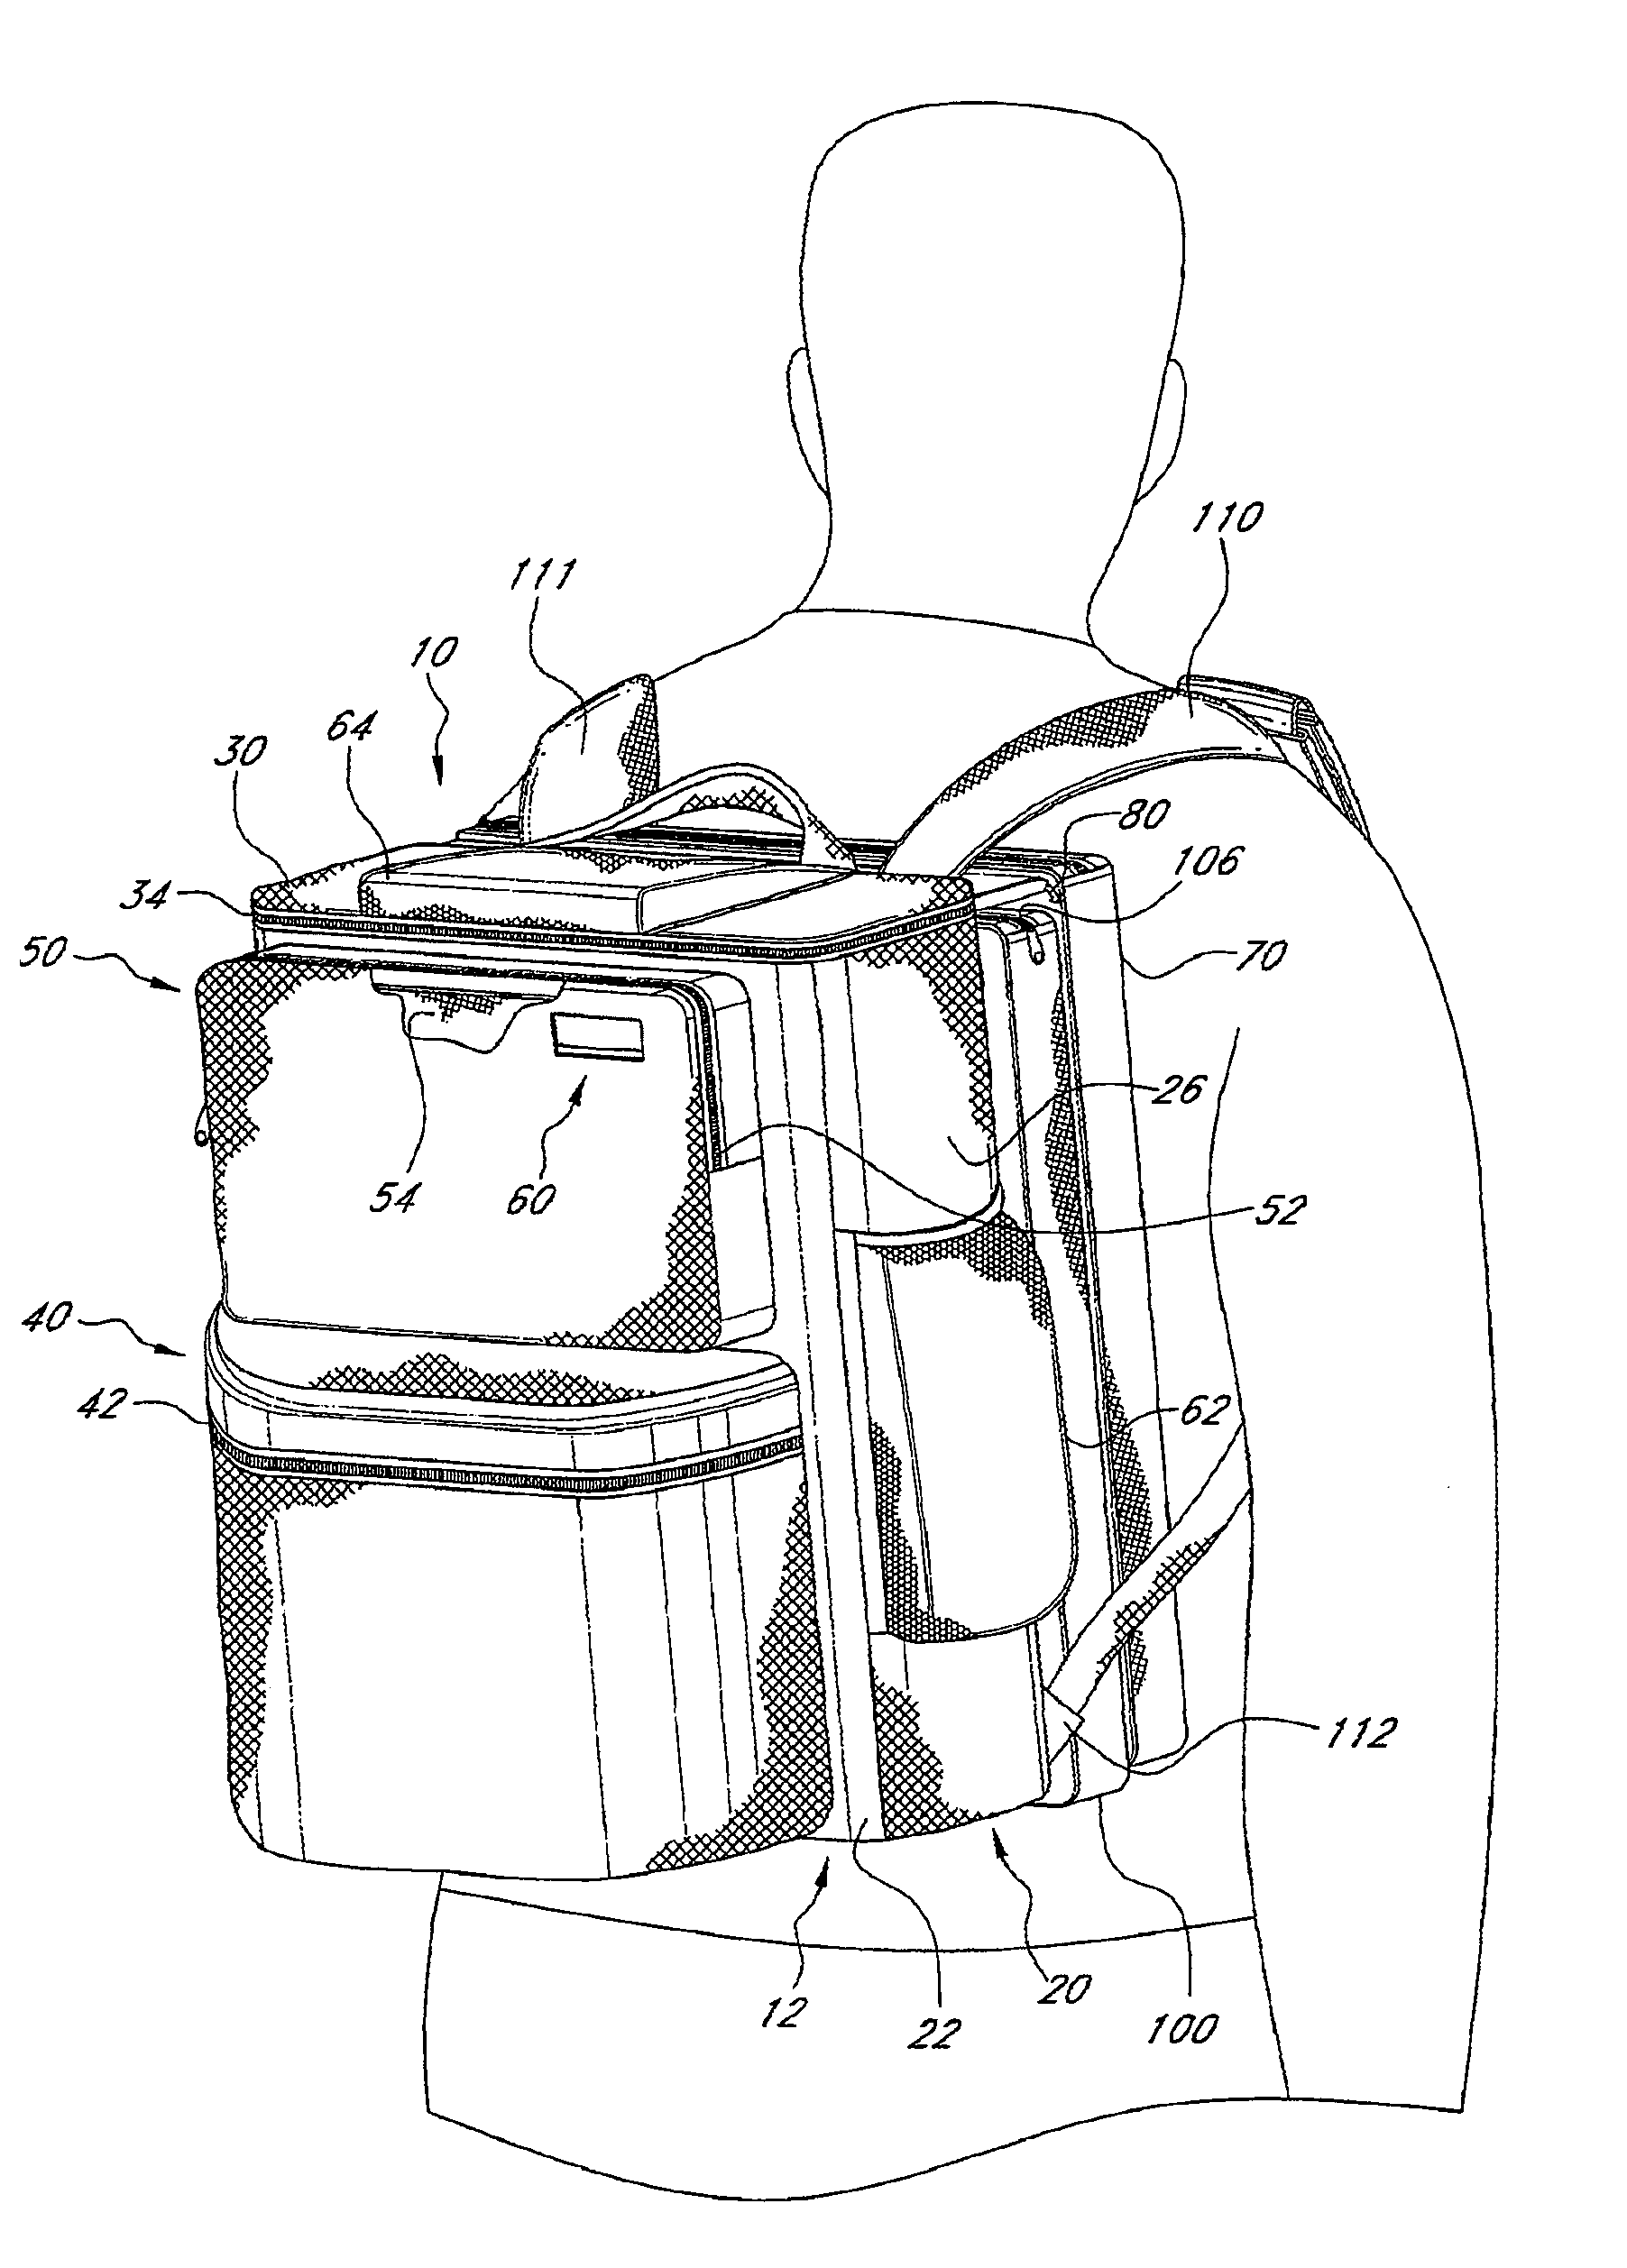 Multi-hanging position transportable article holder for multi-type seating